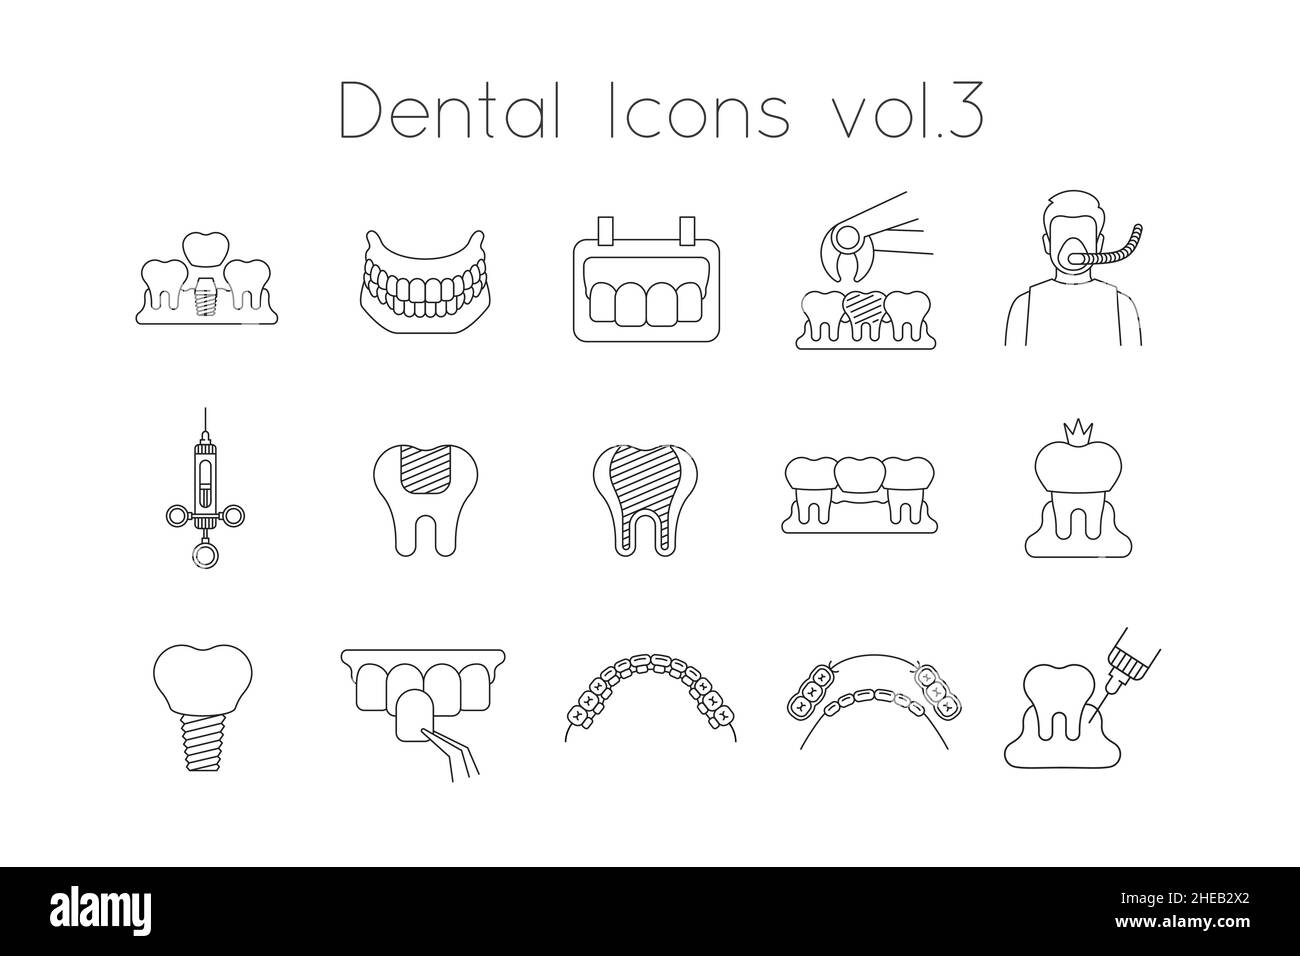 Dentistry icons. Thin line vector signs of dental clinic services. Oral health care concepts. Dental implants, surgery, orthodontics. Teeth diseases a Stock Vector